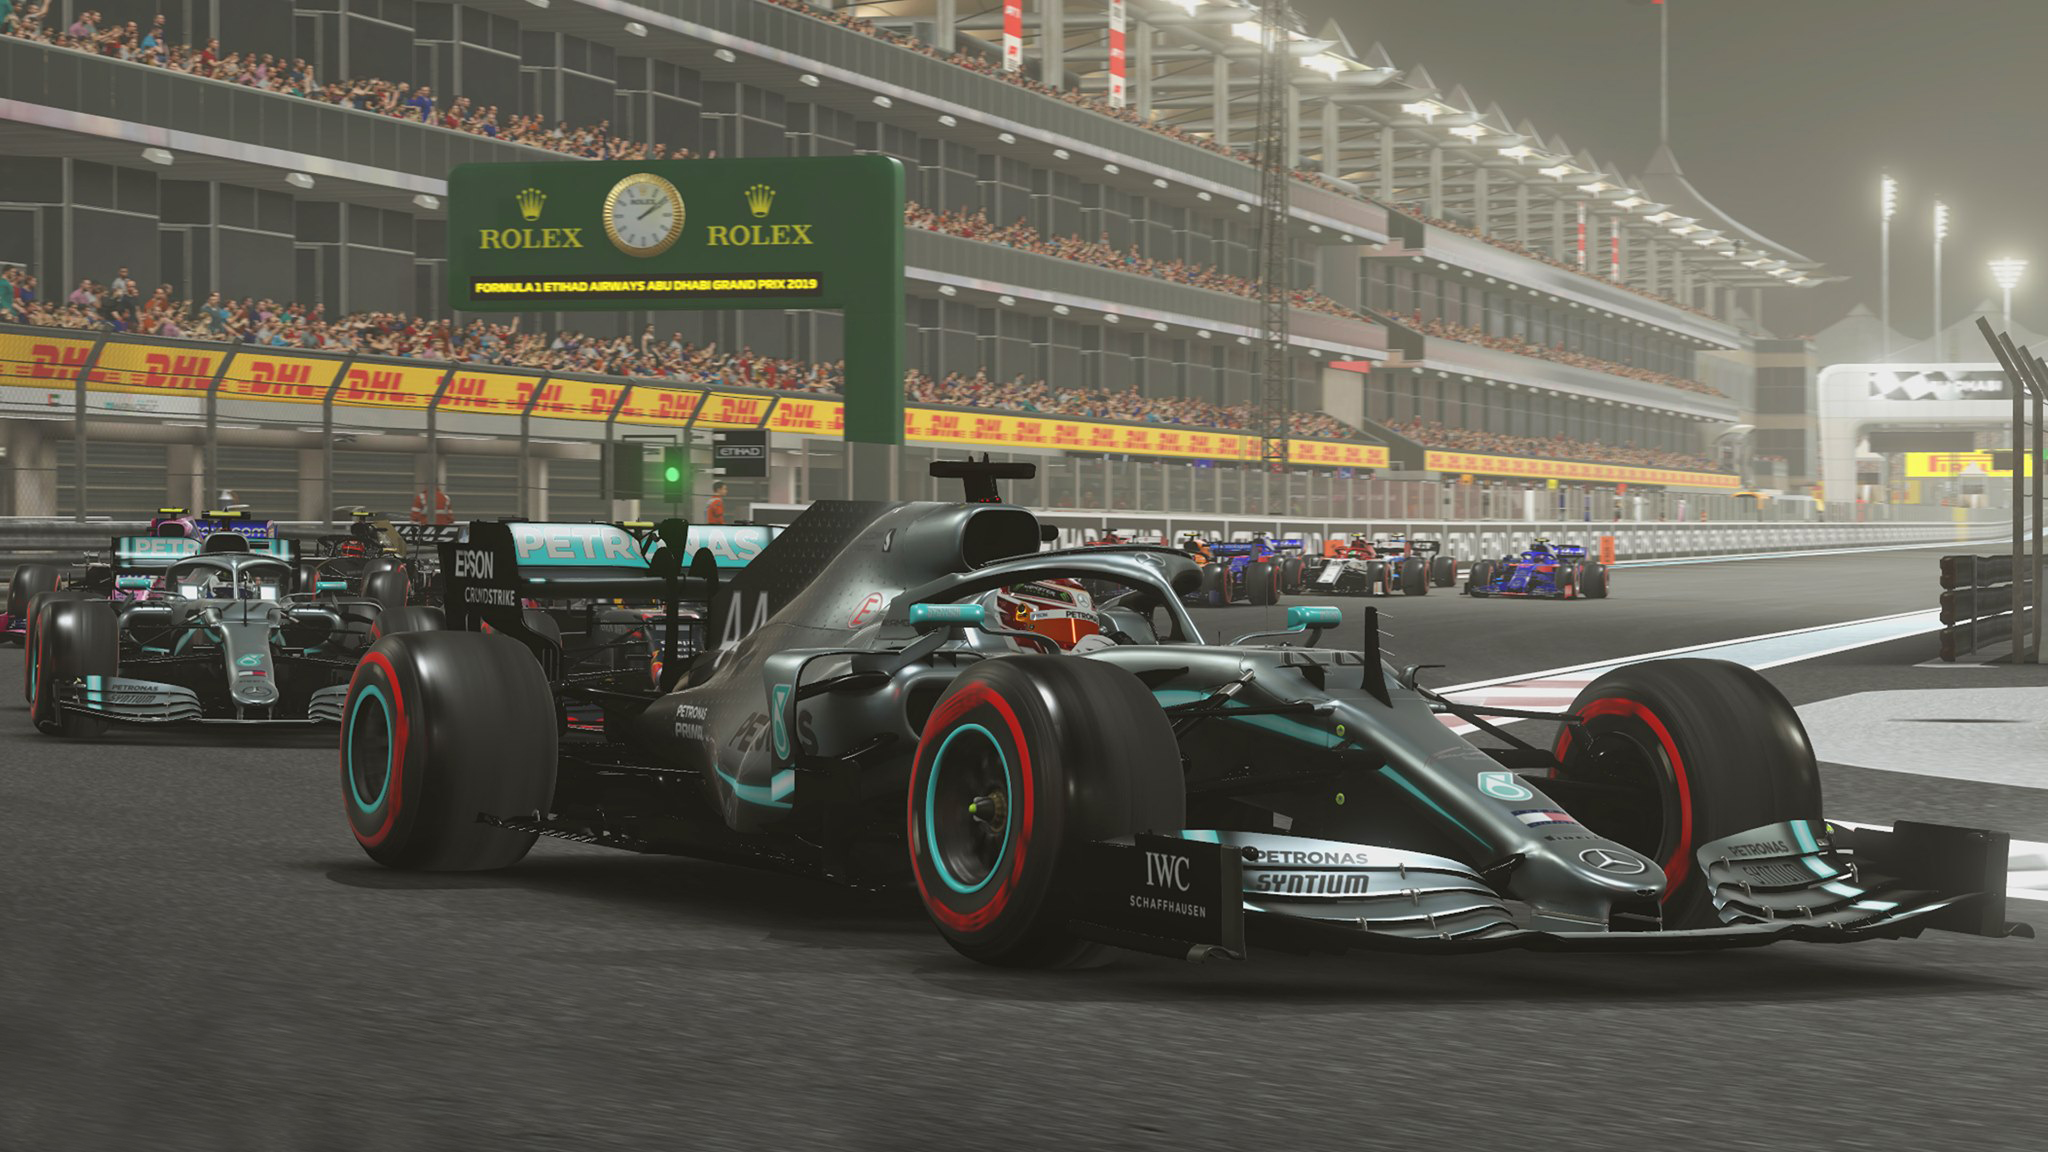 F1 2019 GP. F1 2015 Mercedes Abu Dhabi. F1 Constructor standings after Abu Dhabi 2021 pictures.